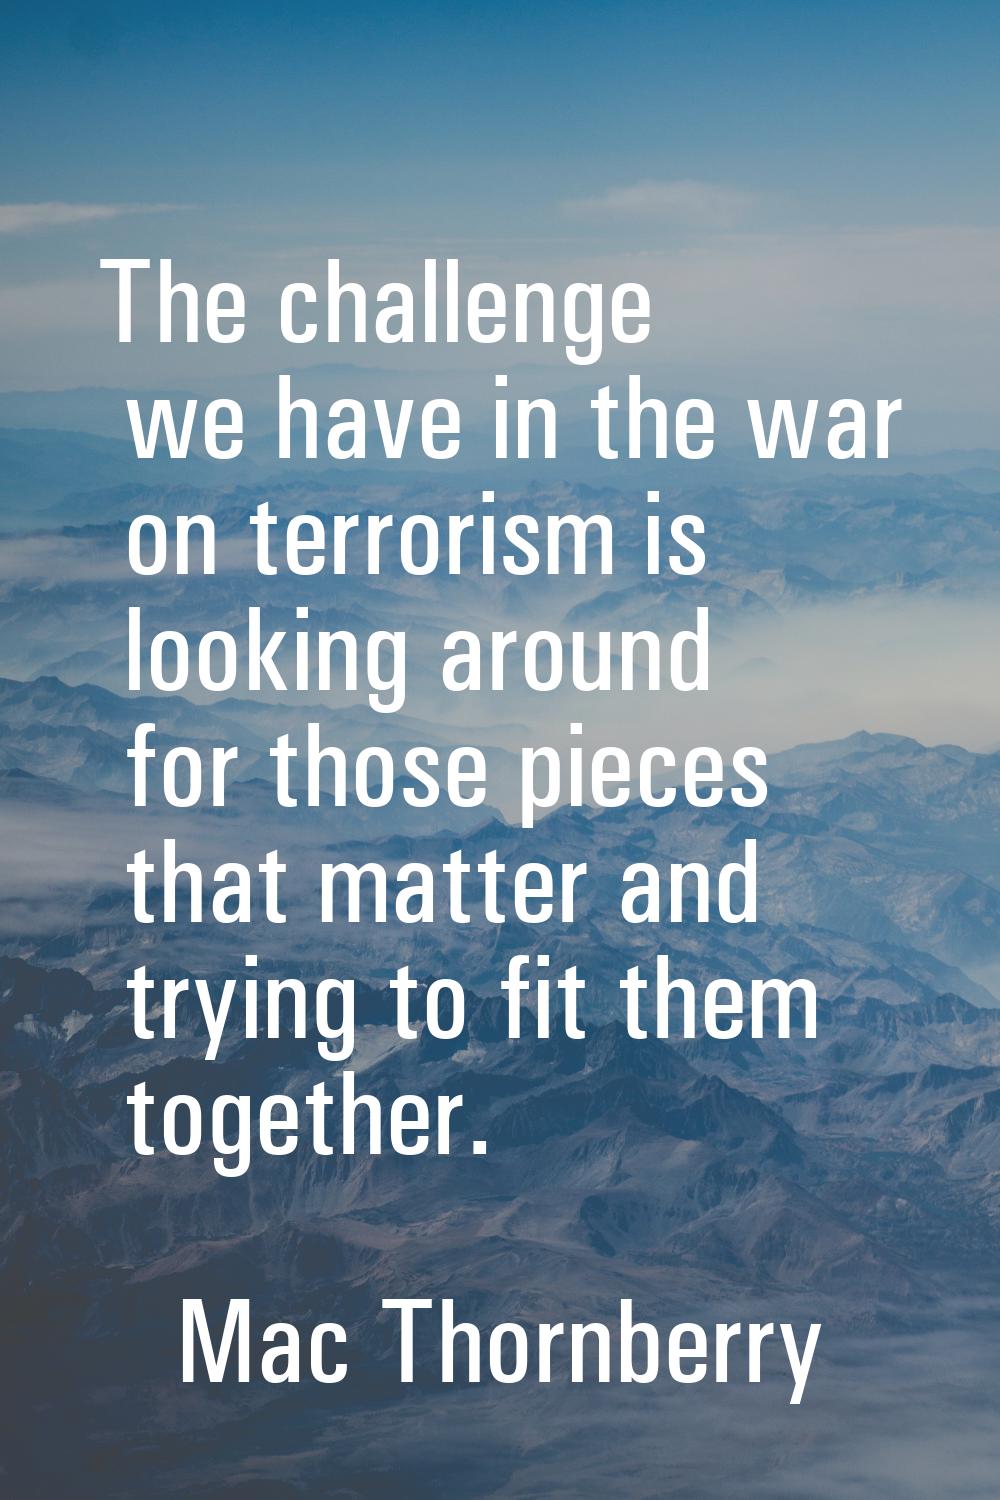 The challenge we have in the war on terrorism is looking around for those pieces that matter and tr